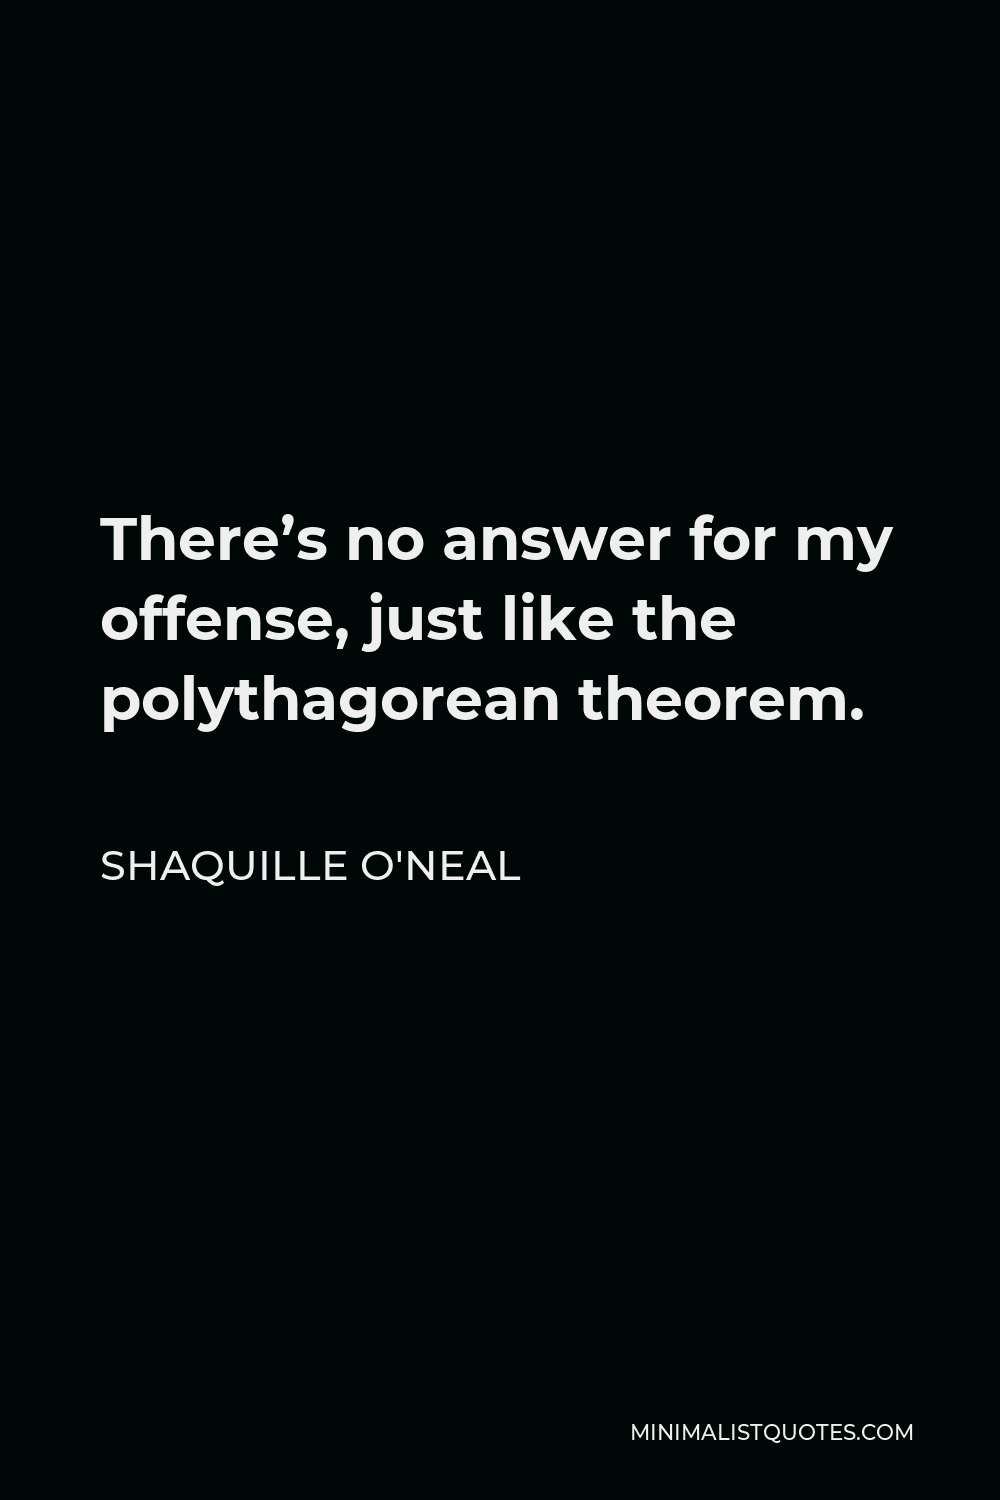 Shaquille O'Neal Quote - There’s no answer for my offense, just like the polythagorean theorem.